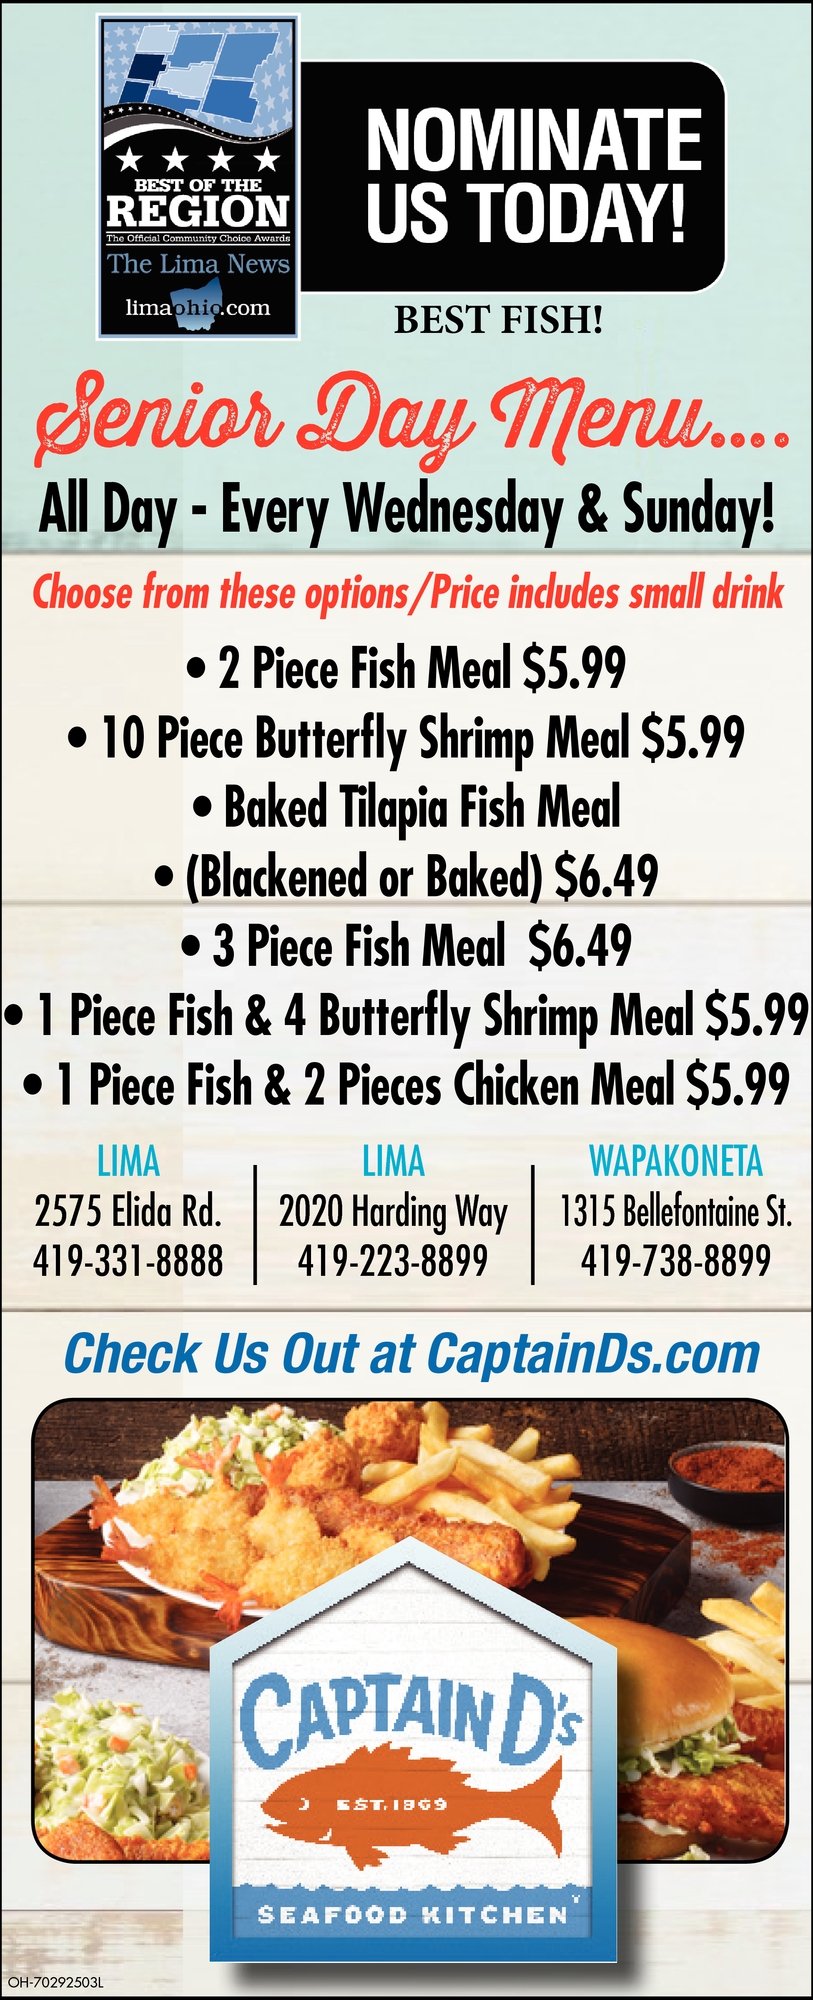 what are the 10 senior meals at captain d's?